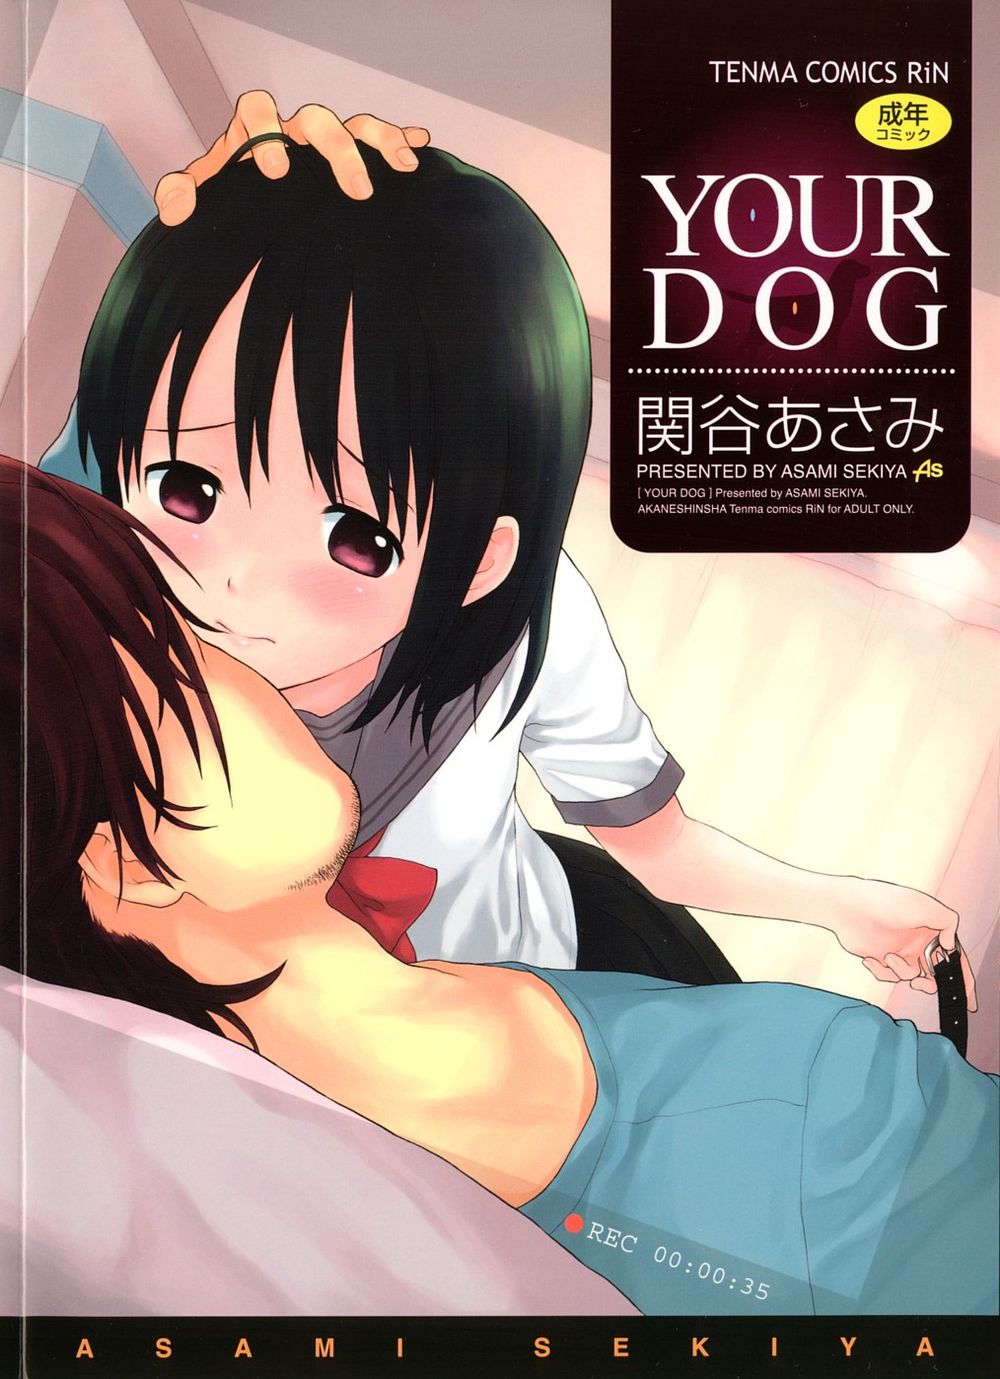 Porn full color hentai comic my dog page one